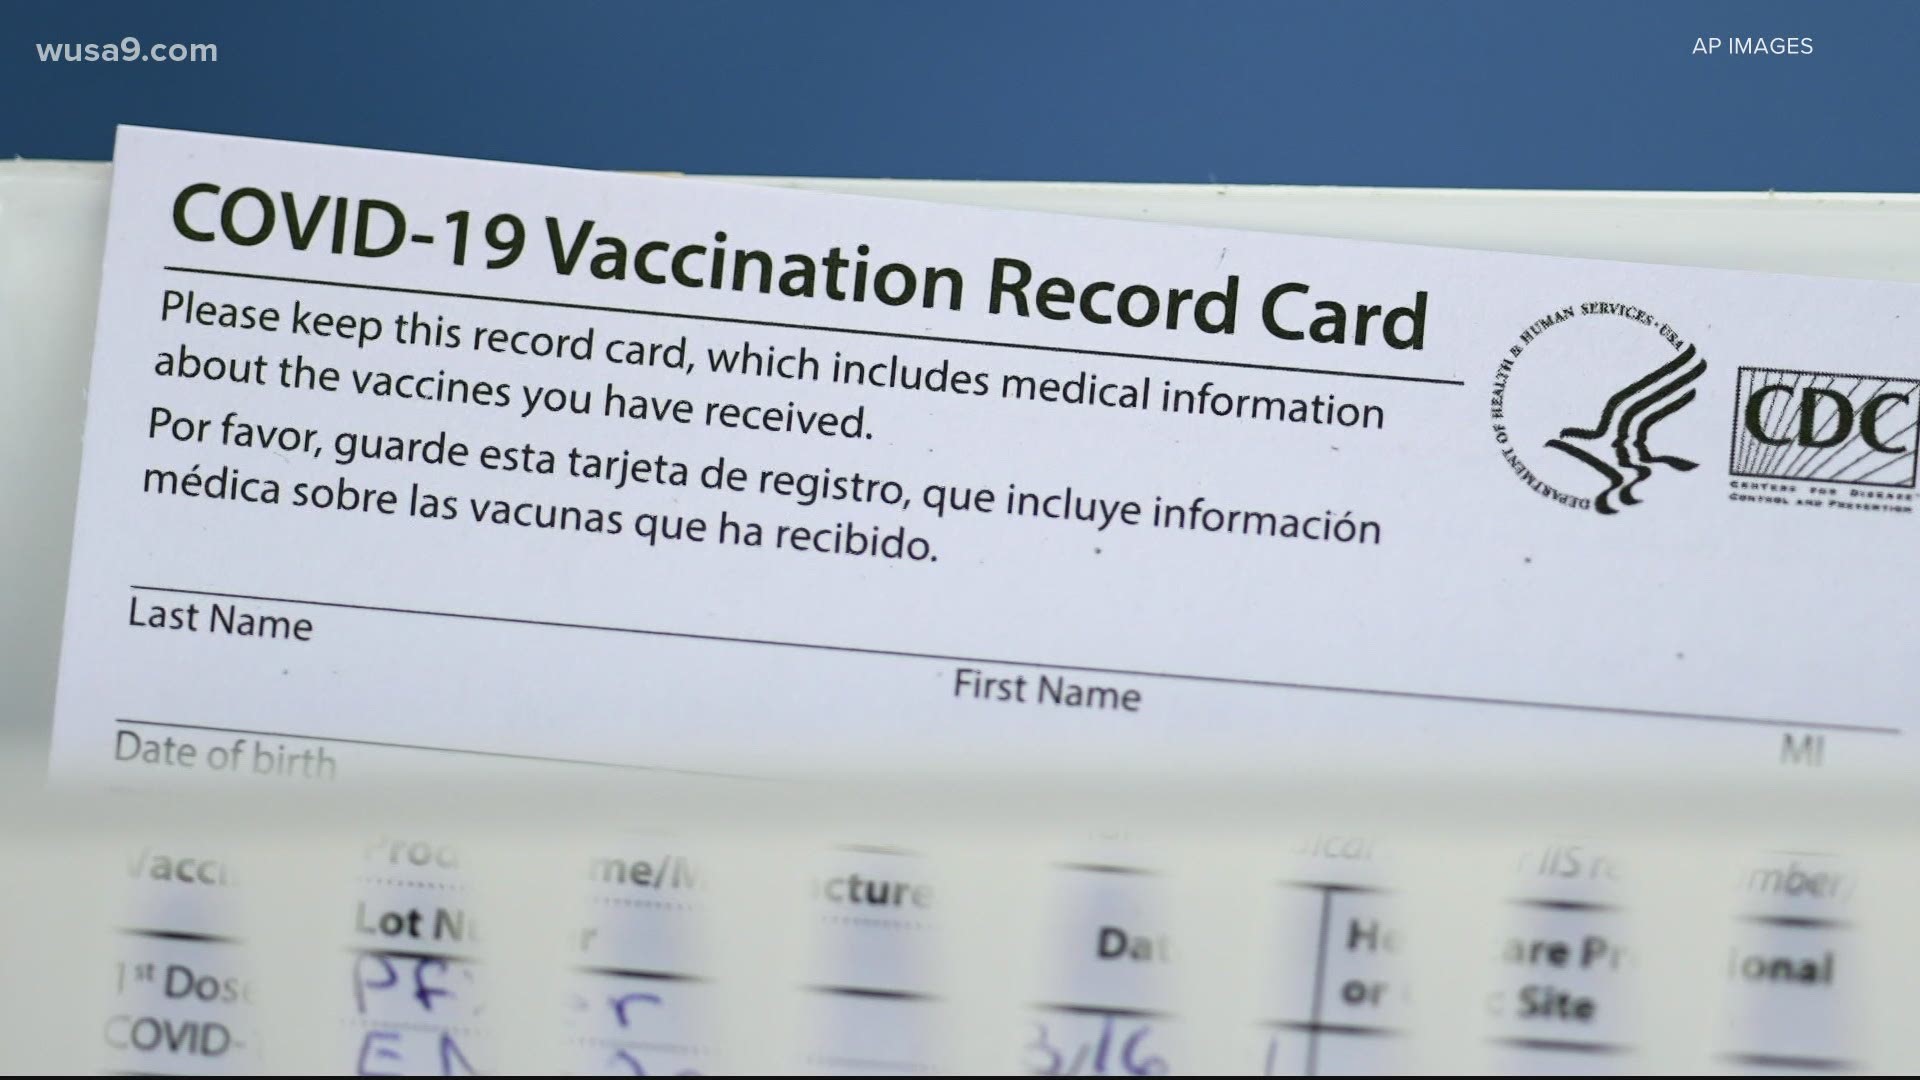 There have been several reports of people making fake vaccine cards. But, states already have a record of who has gotten the vaccines.